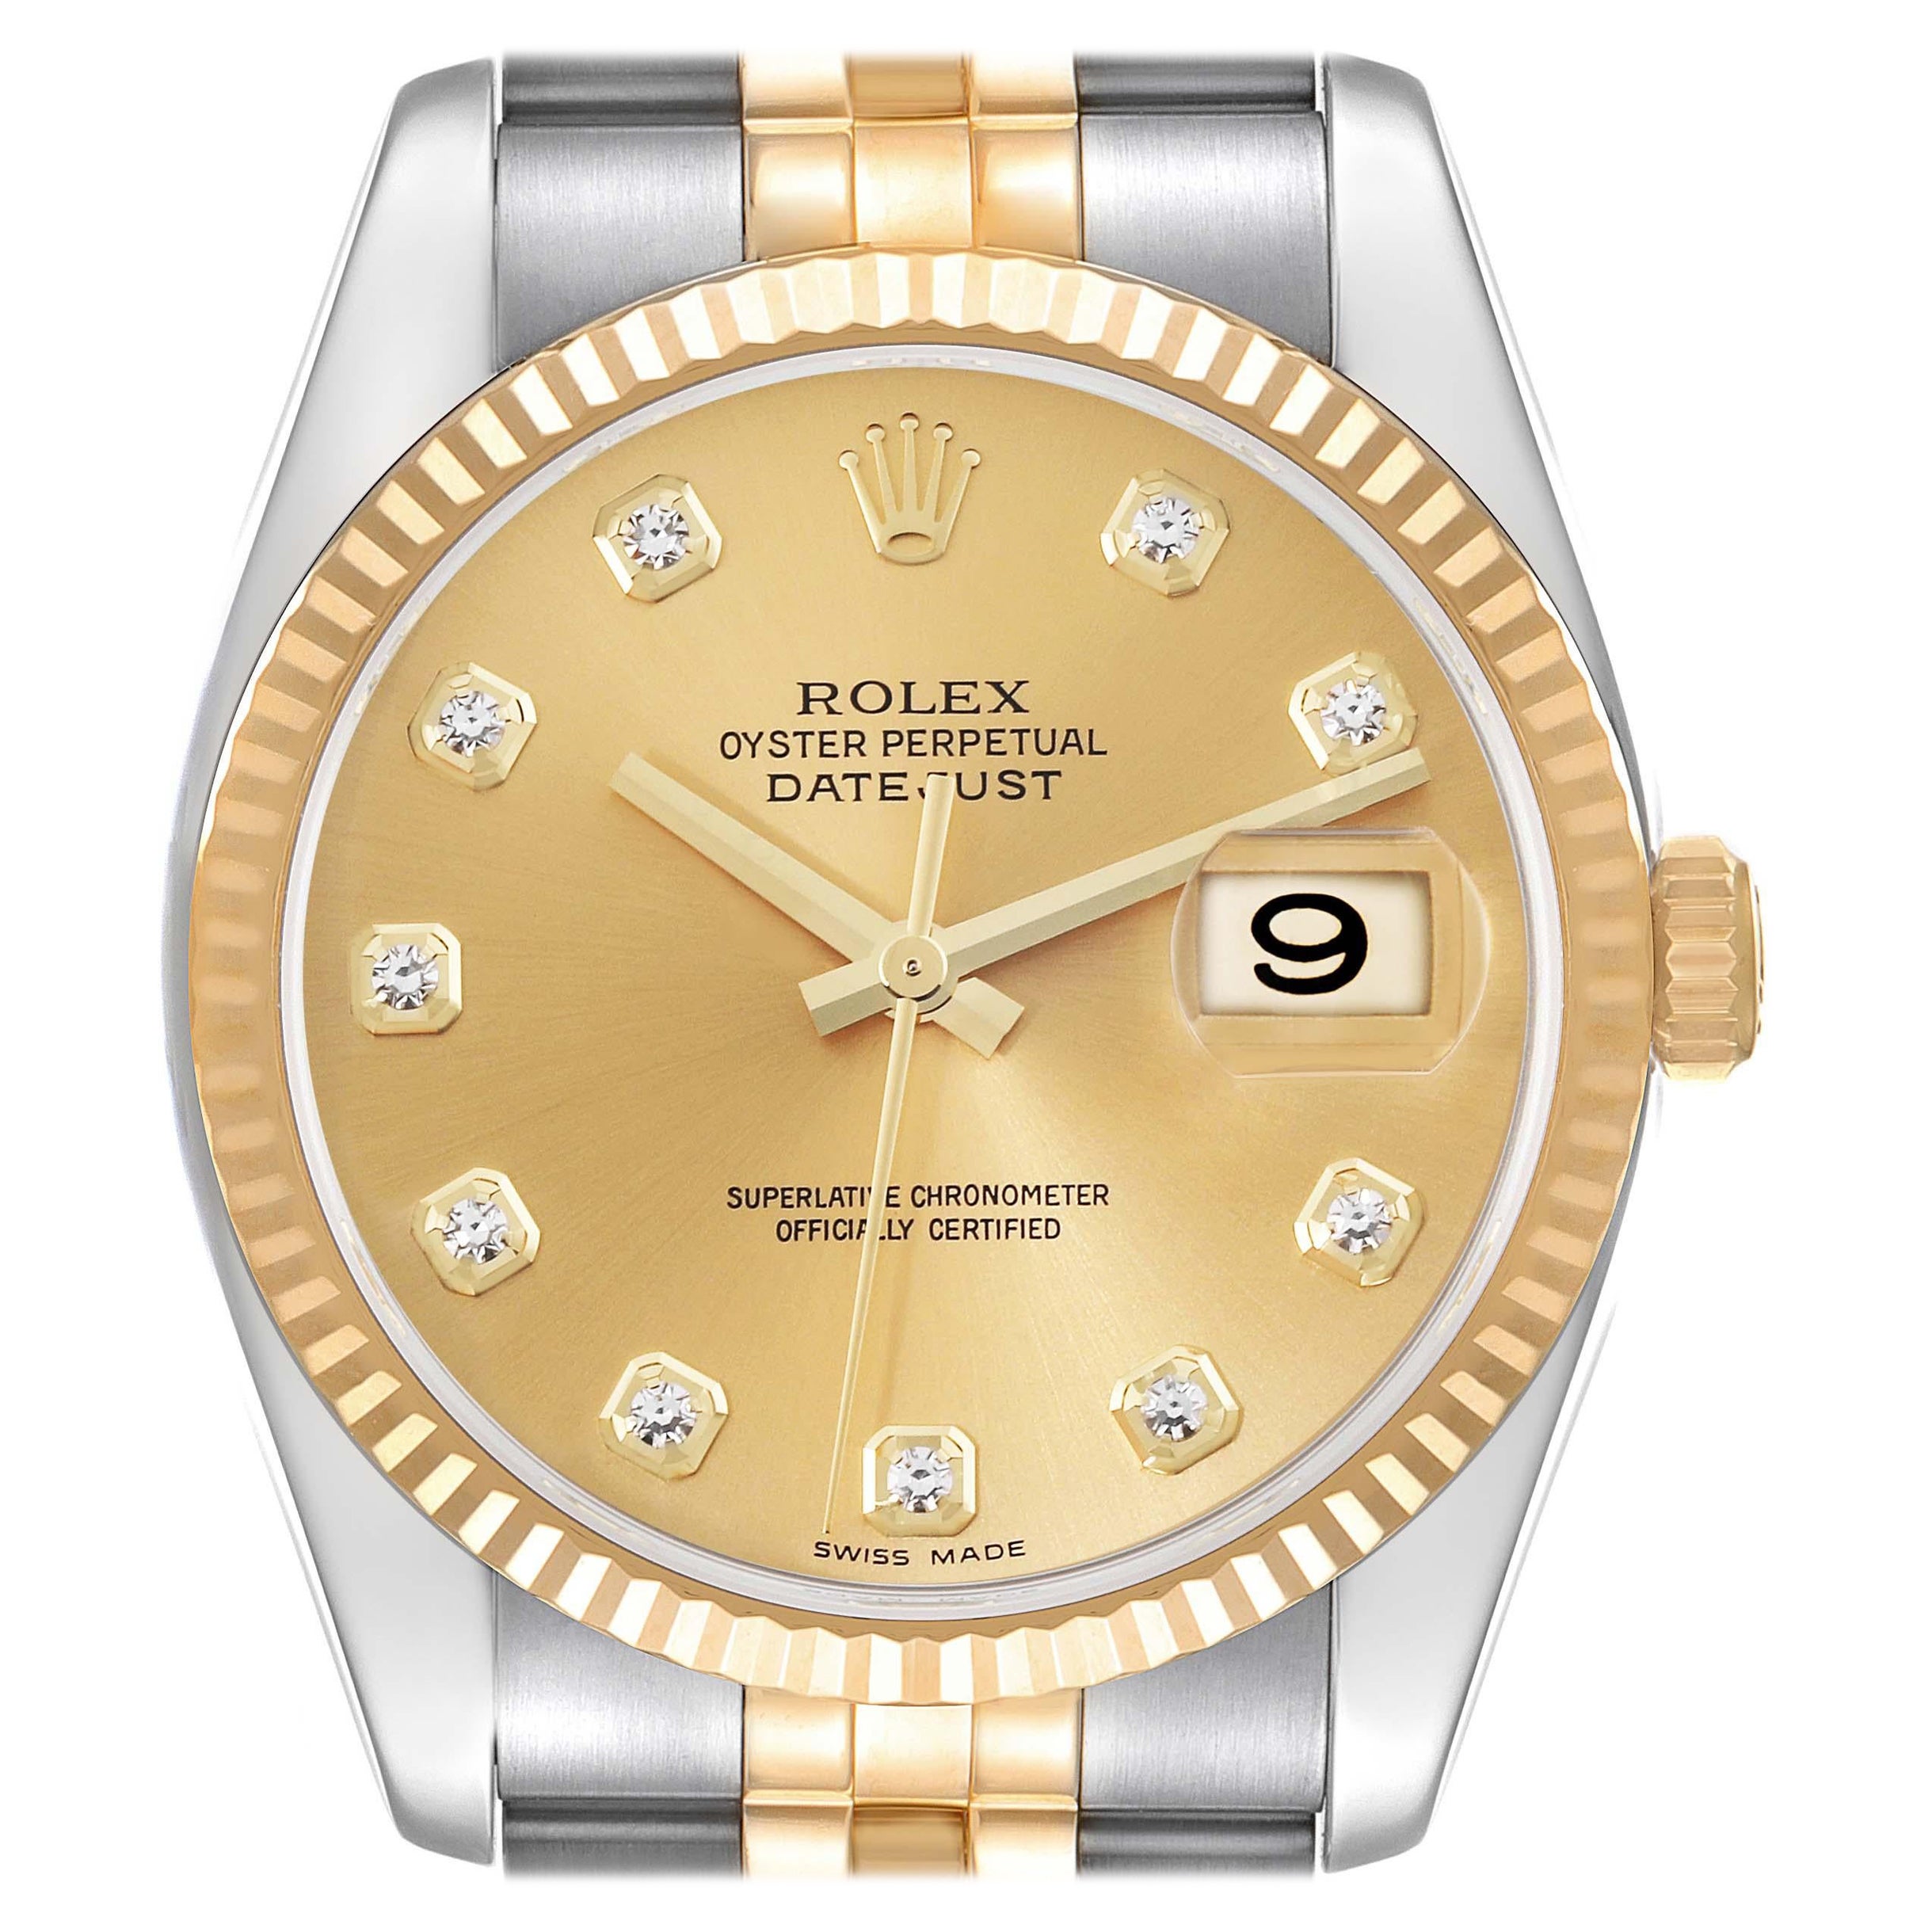 Rolex Datejust Steel Yellow Gold Champagne Diamond Dial Mens Watch 116233 For Sale